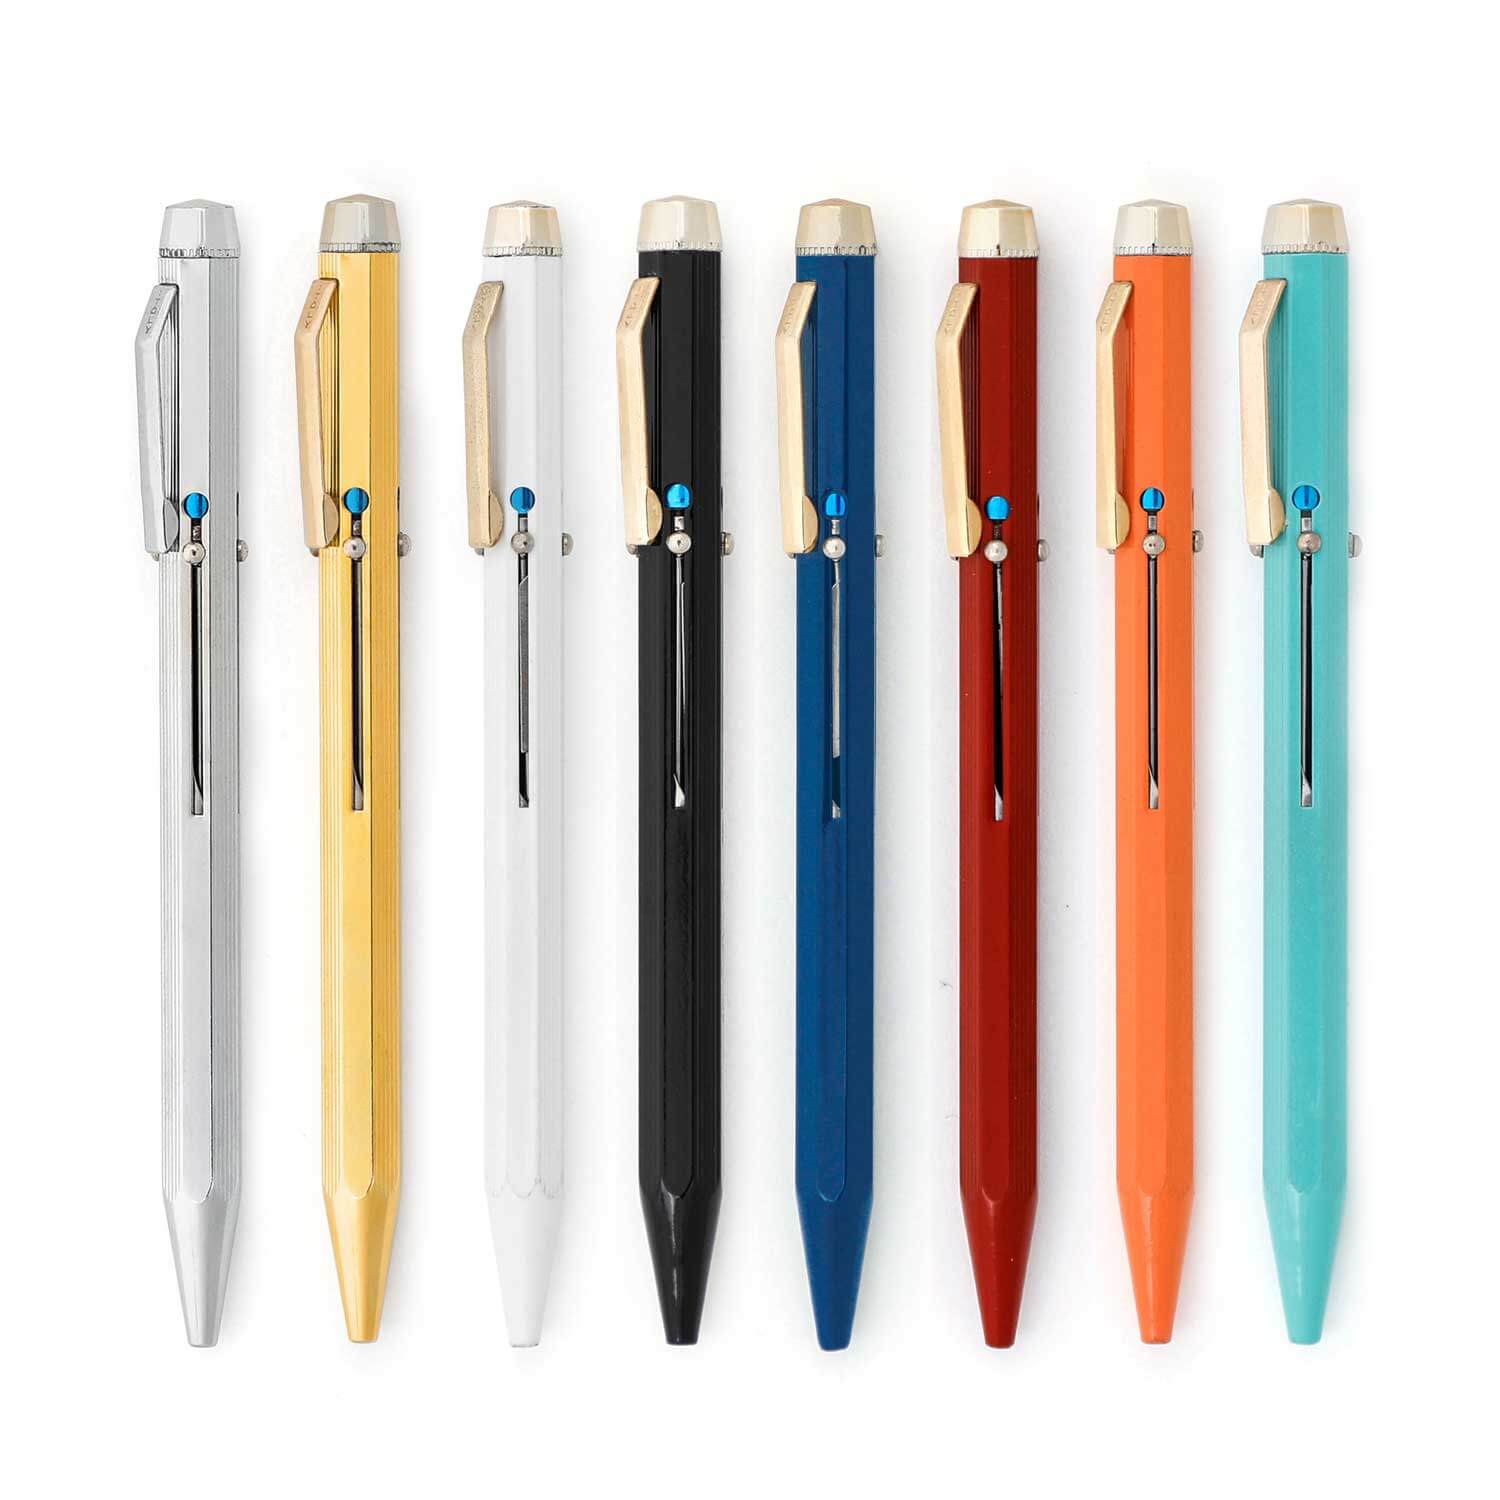 products/hightide-4-color-ballpoint-pen-t3258-all-colors-1500x1500.jpg